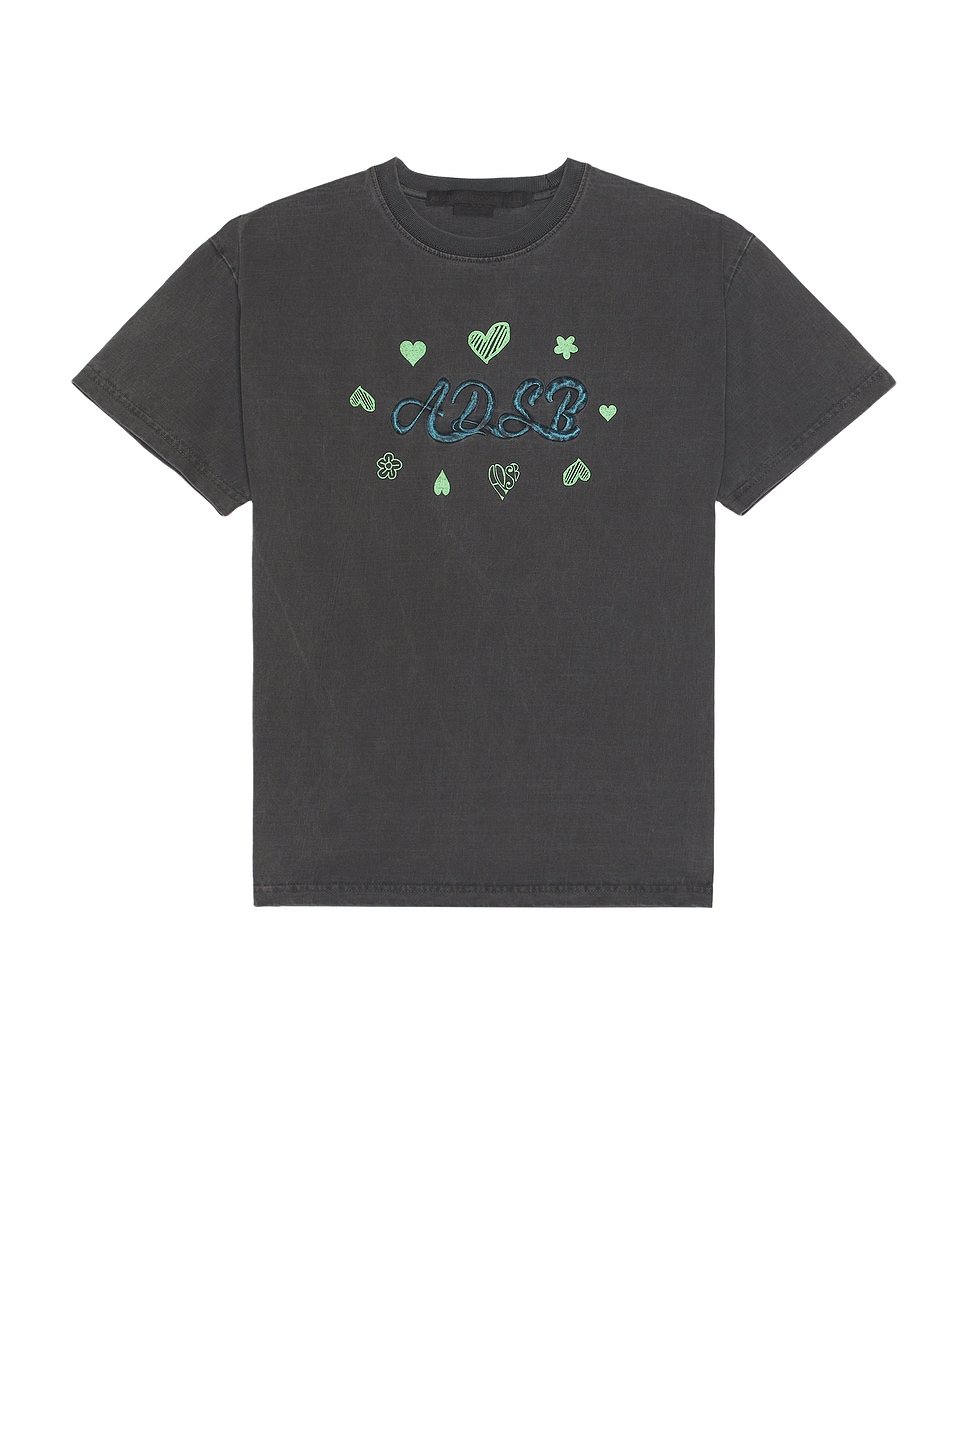 Image 1 of Andersson Bell Essential ADSB Hearts Card T-Shirt in Charcoal